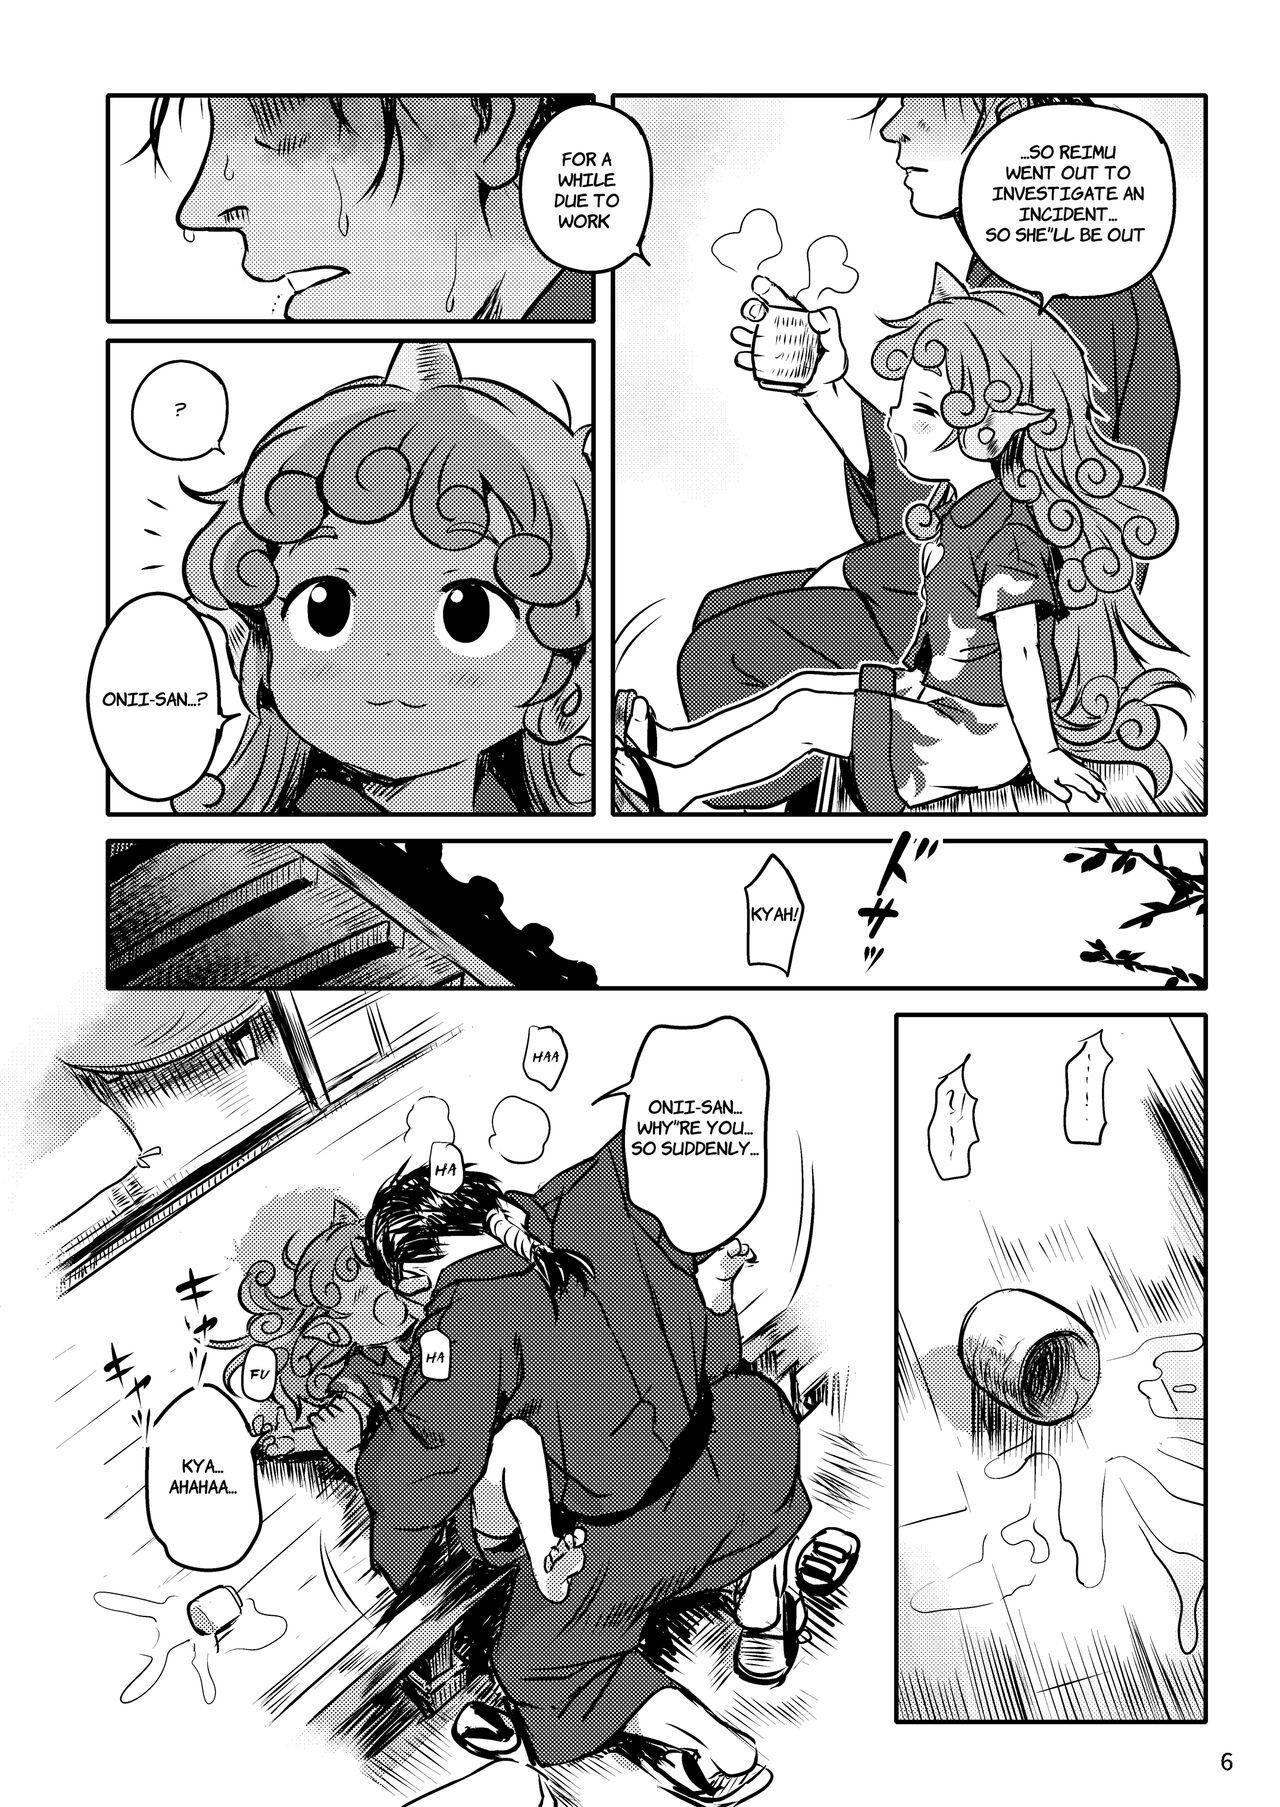 Tit Haratte! Aun-chan! - Touhou project Leaked - Page 6